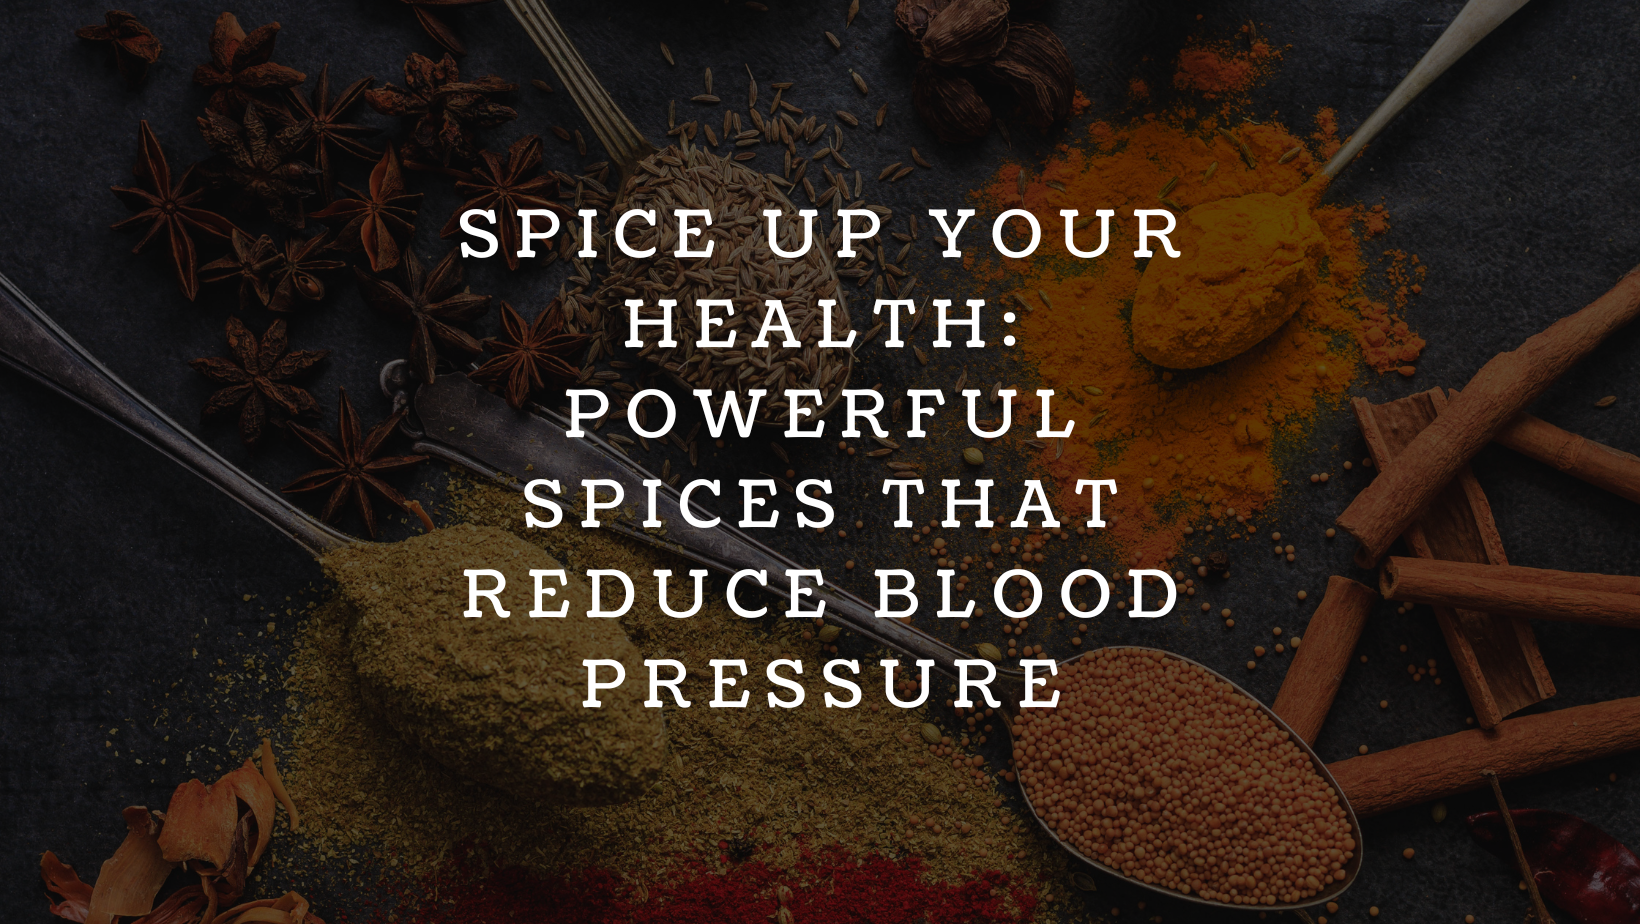 Spice Up Your Health: Powerful Spices That Reduce Blood Pressure